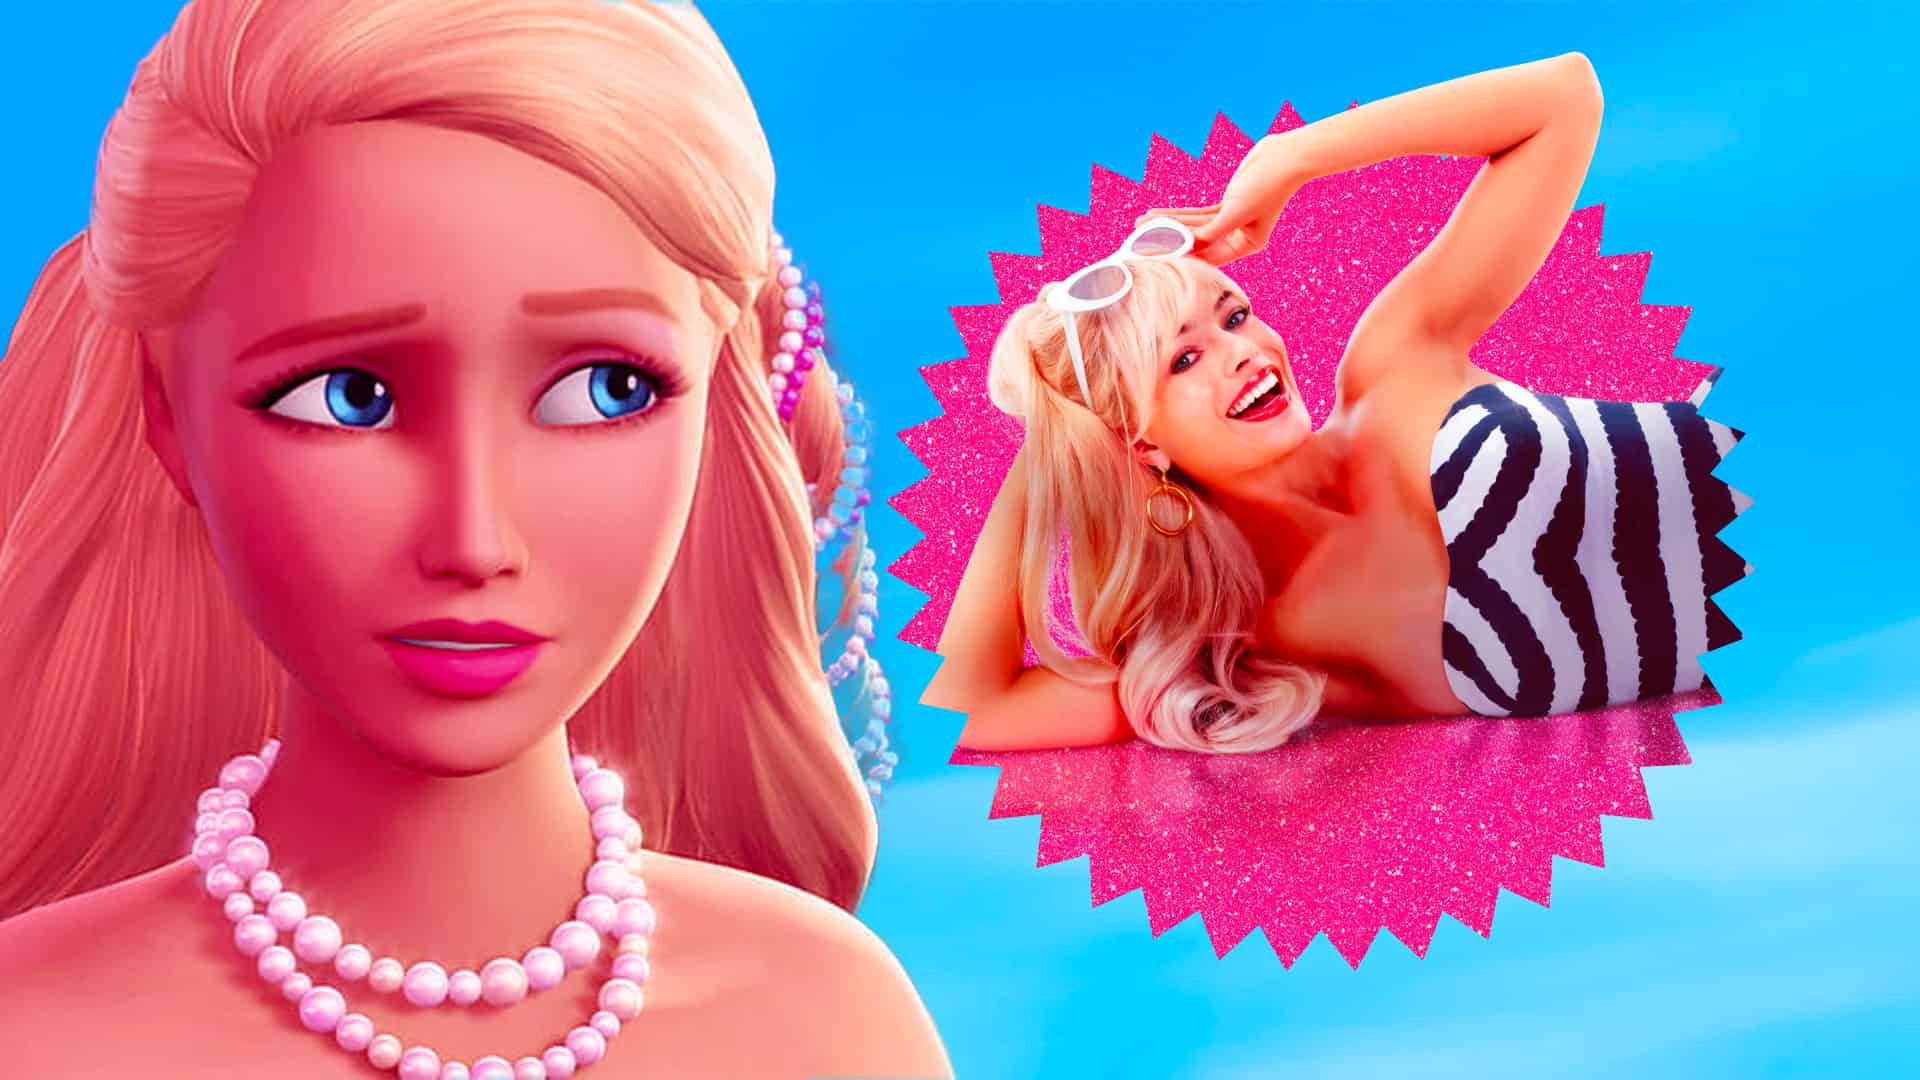 Barbie Movies In Hd and joss